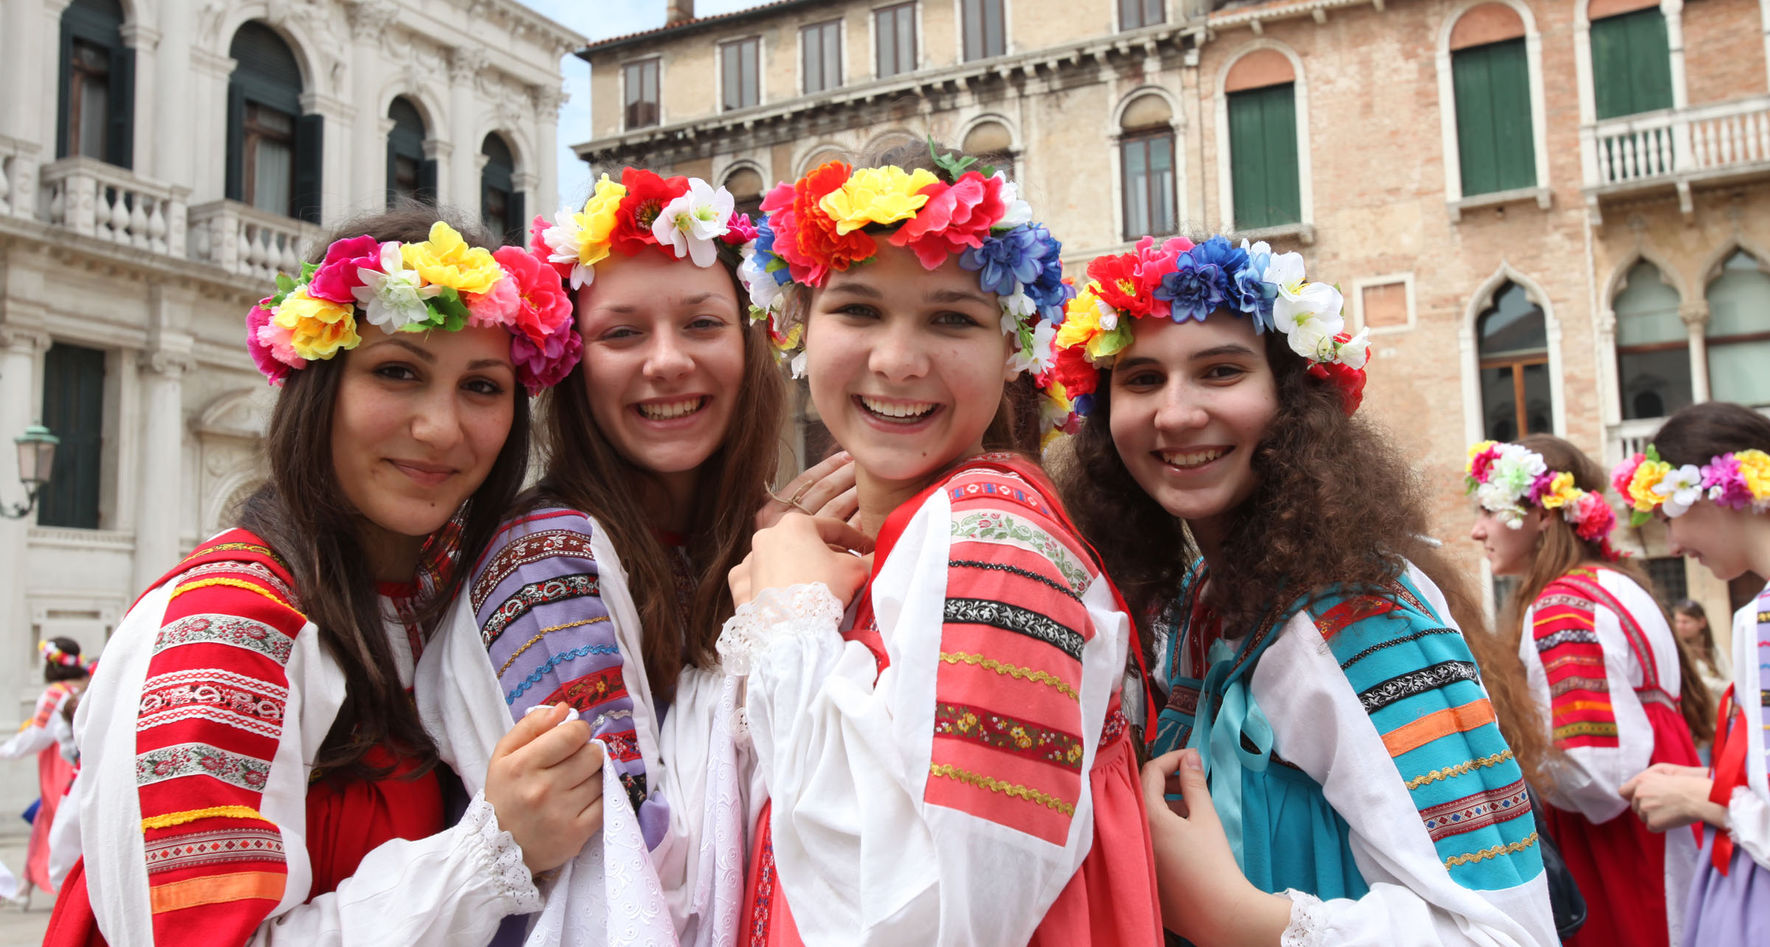 Young singers with wreaths of flowers © Giovanni De Marco